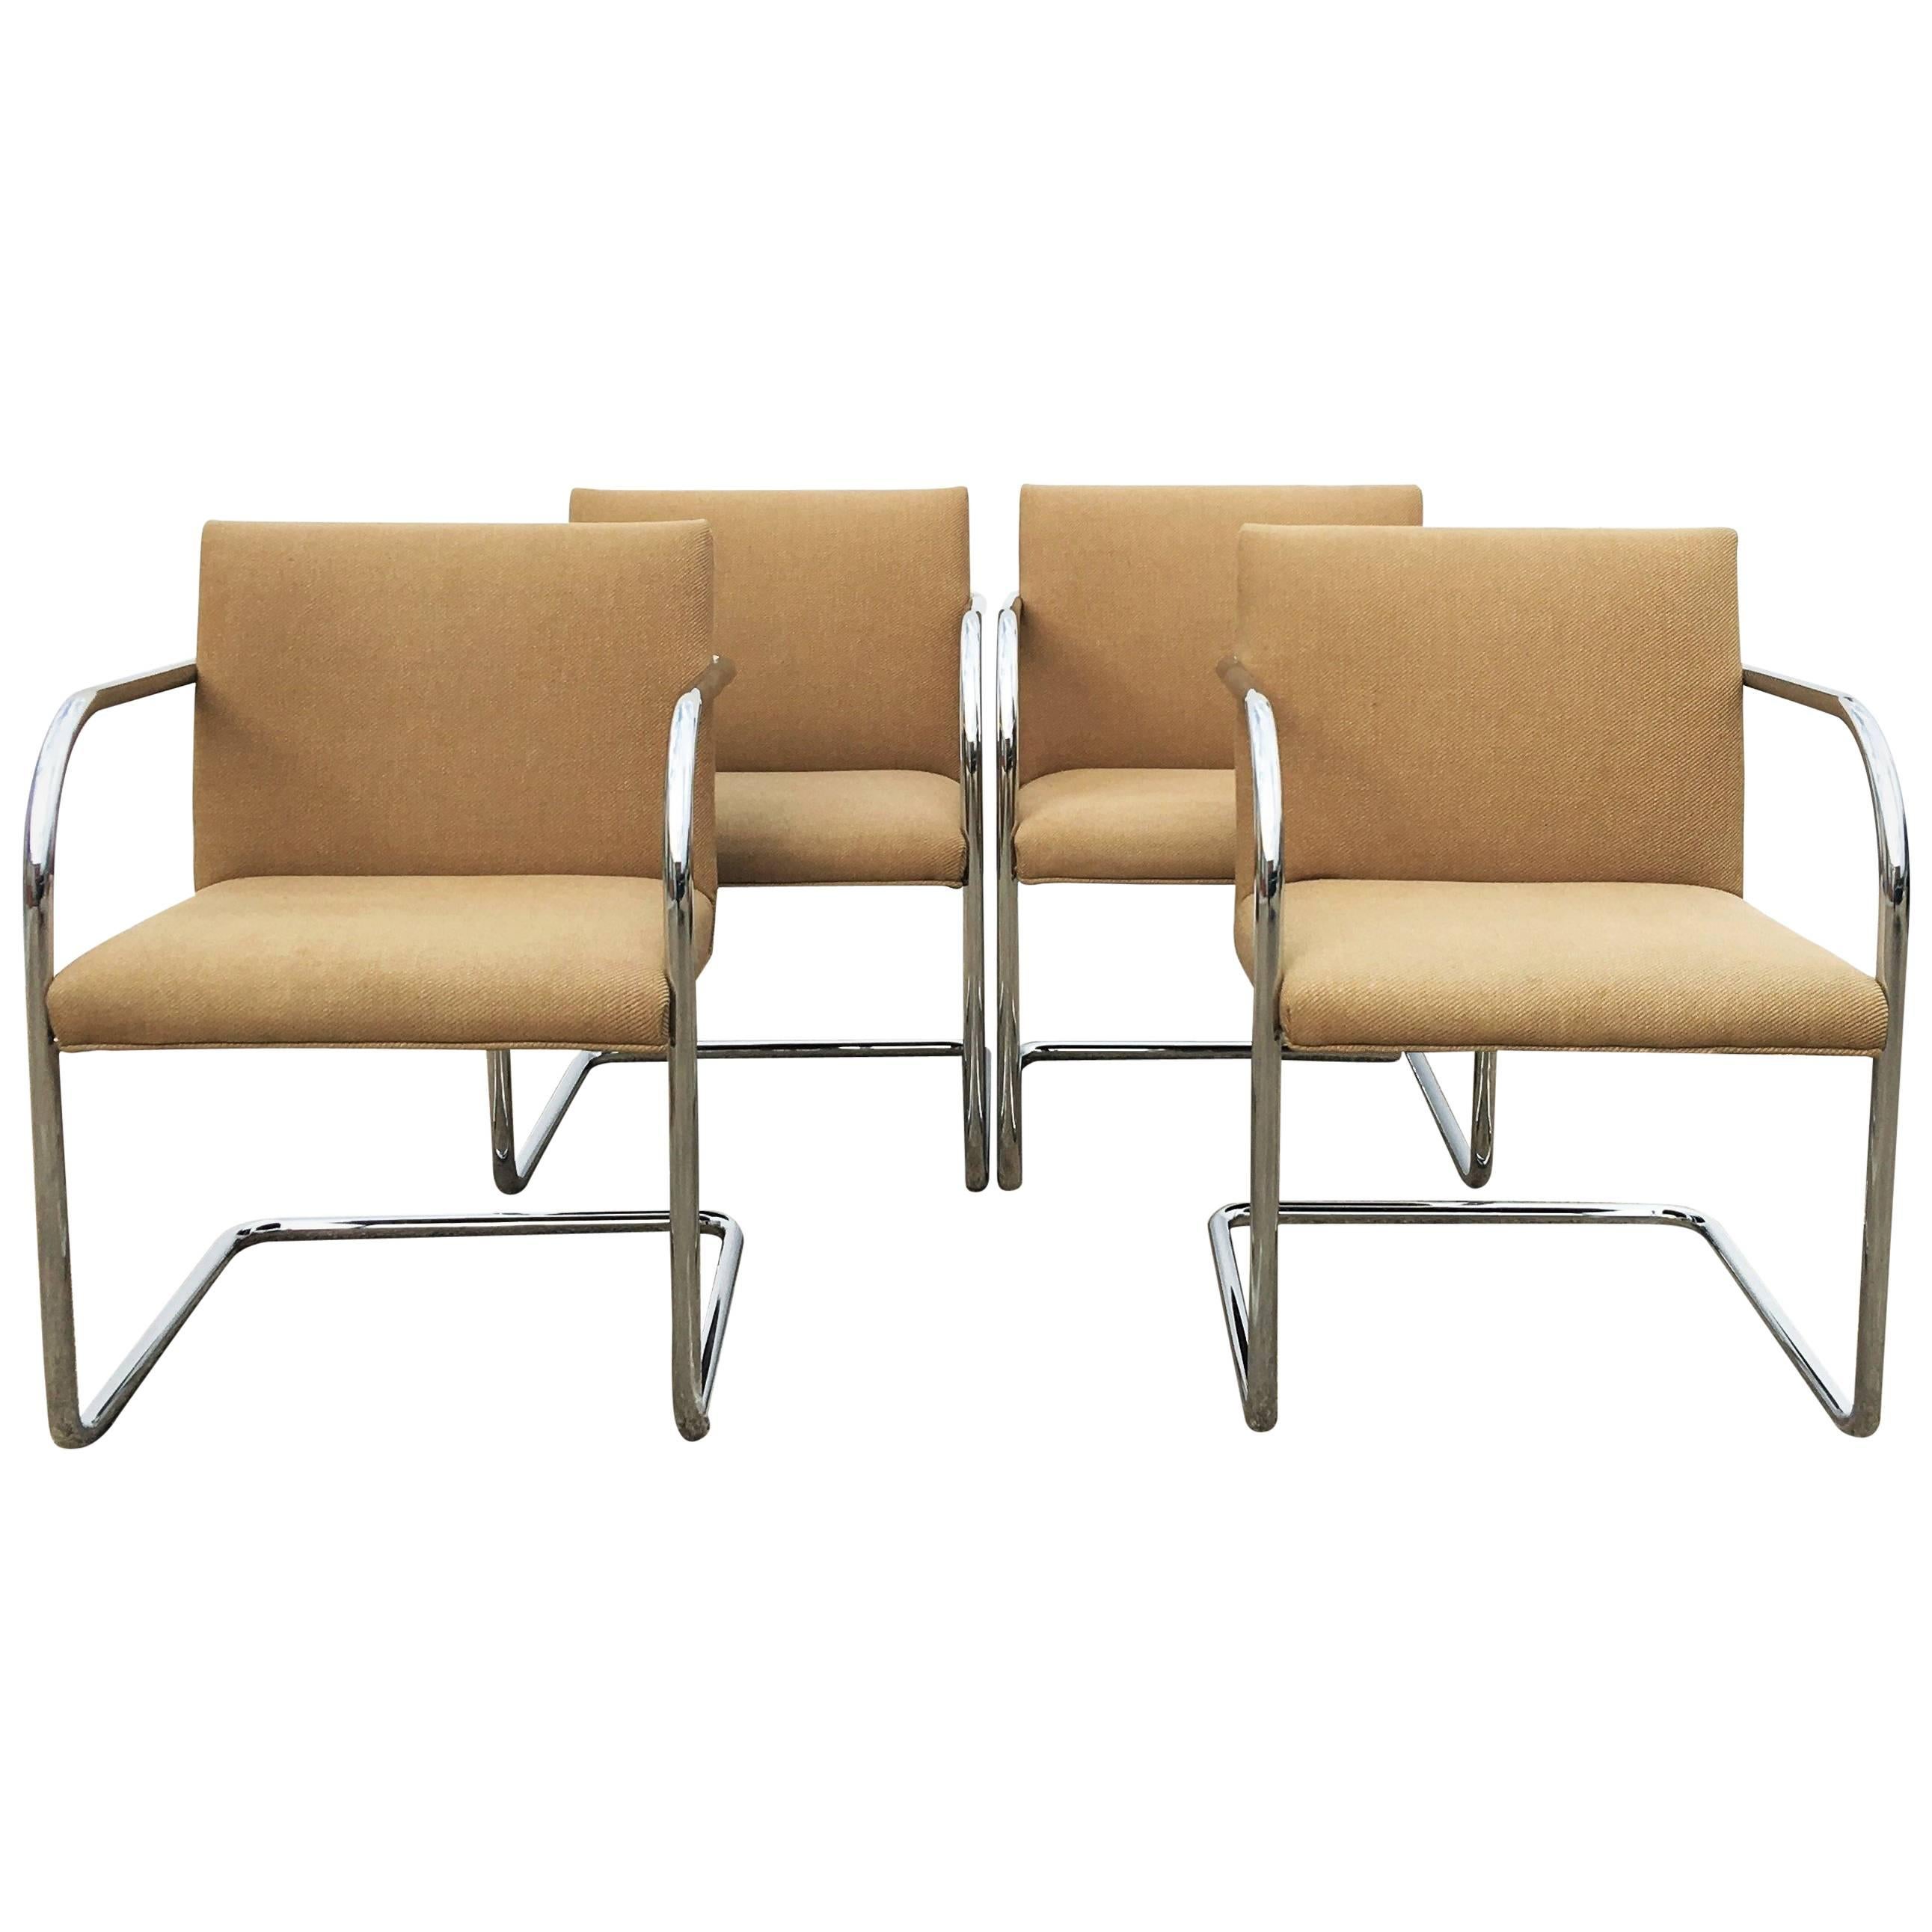 Set of Four Tubular Brno Chairs For Sale